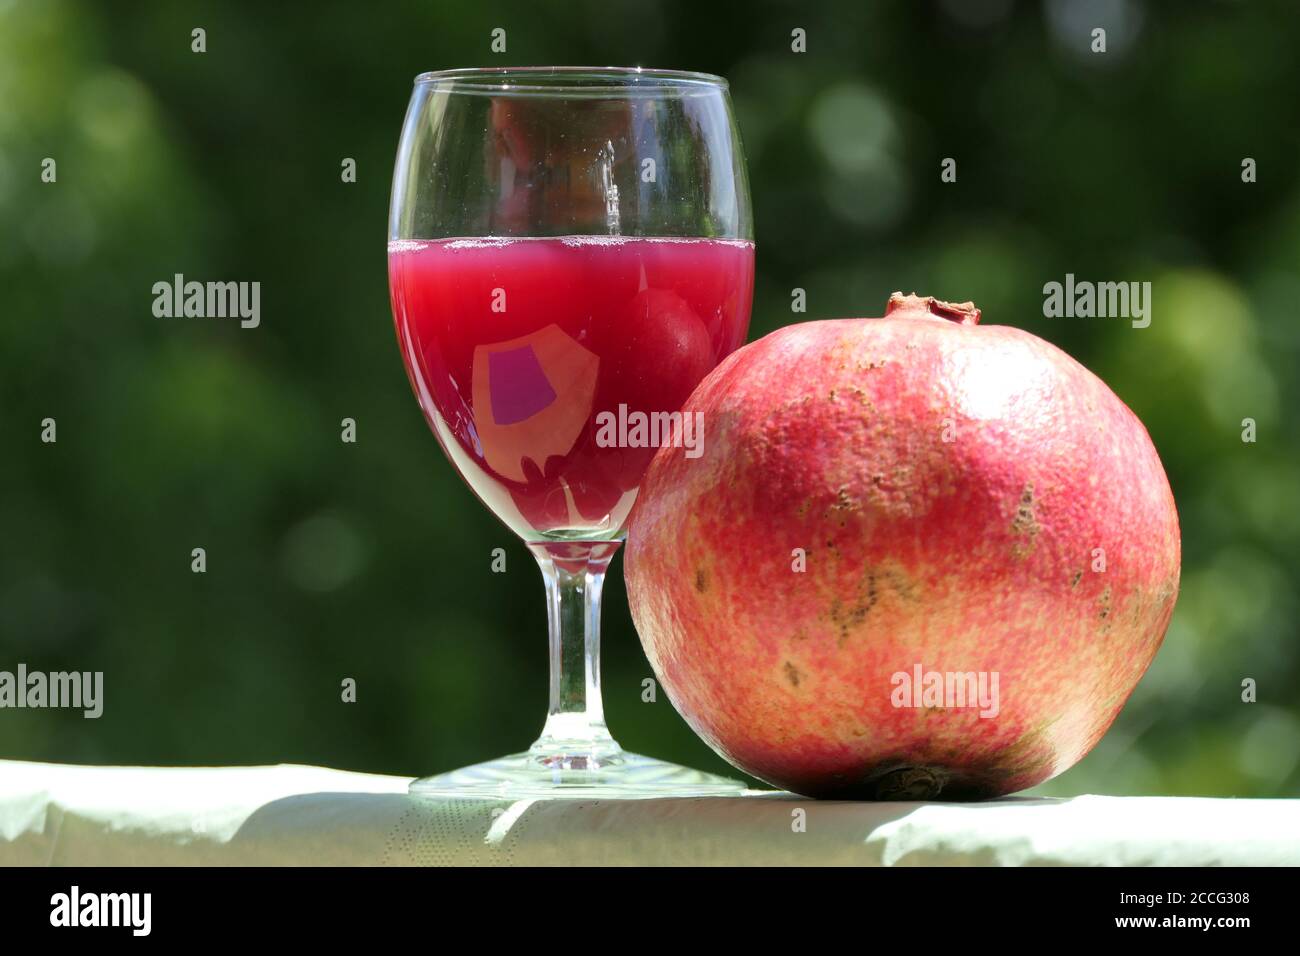 Pure health: freshly squeezed pomegranate juice in a glass with a whole ripe pomegranate fruit Stock Photo